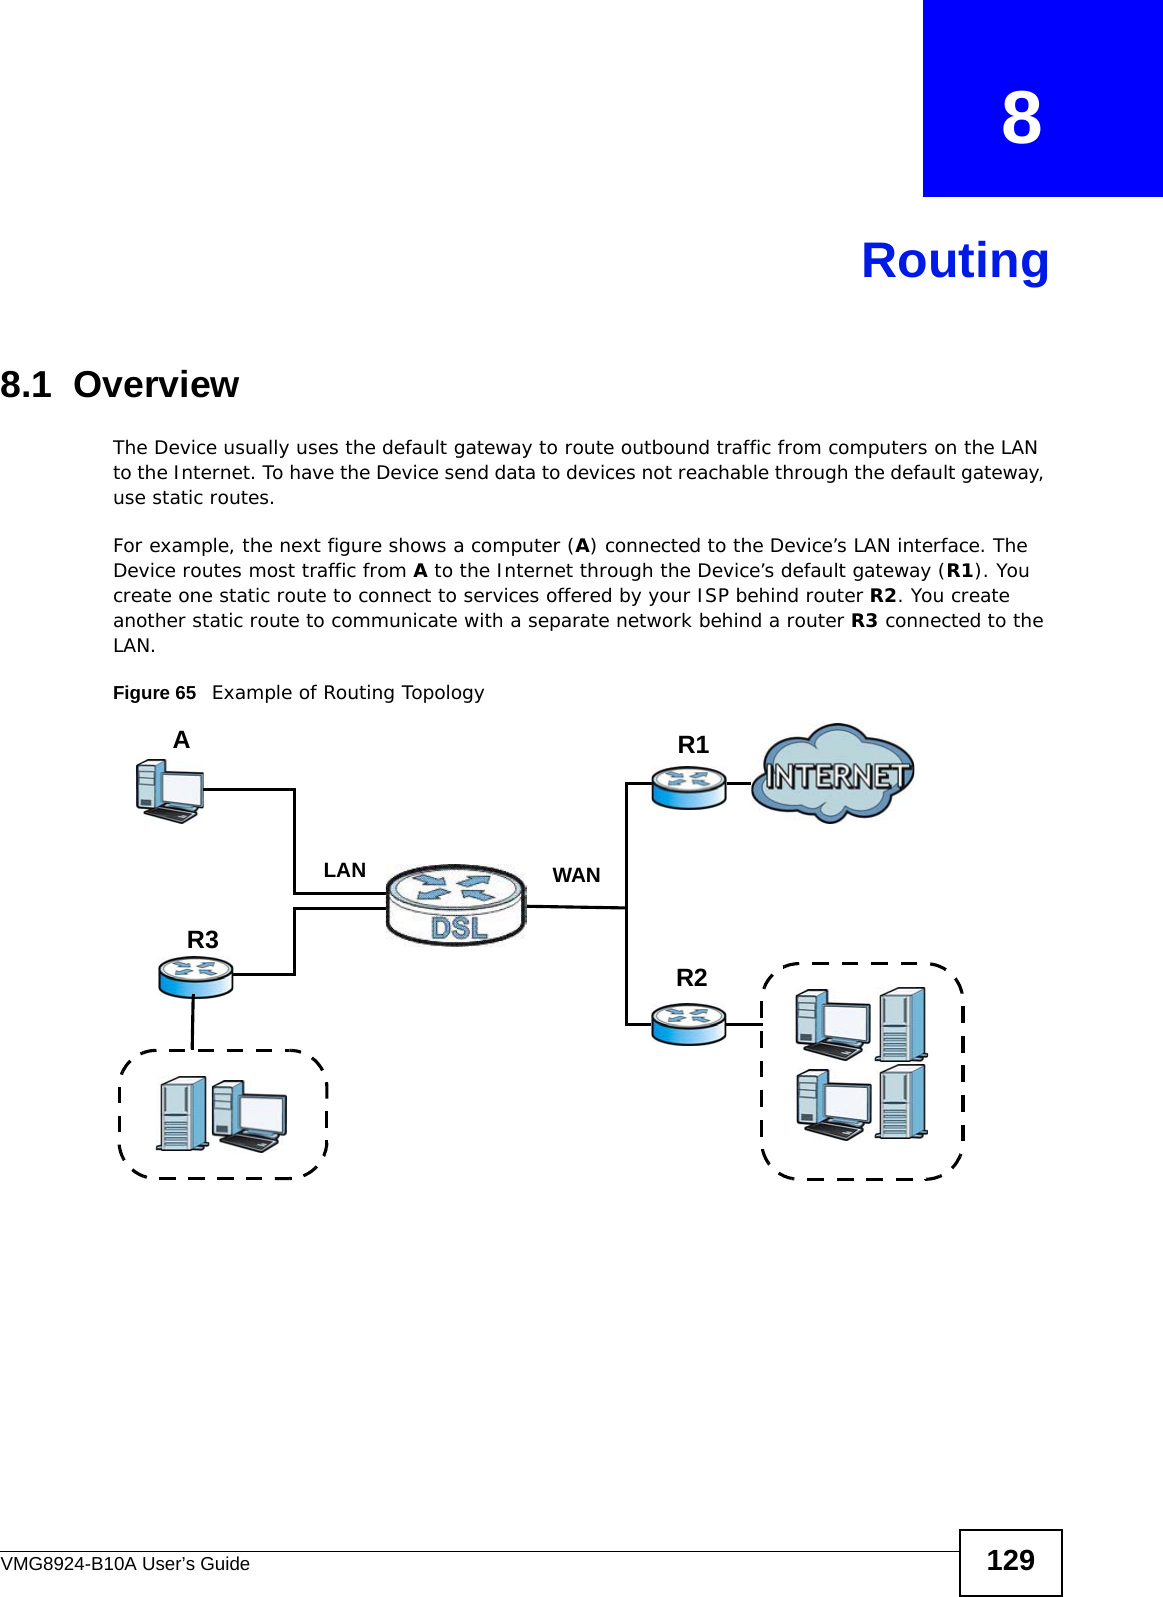 VMG8924-B10A User’s Guide 129CHAPTER   8Routing8.1  Overview The Device usually uses the default gateway to route outbound traffic from computers on the LAN to the Internet. To have the Device send data to devices not reachable through the default gateway, use static routes.For example, the next figure shows a computer (A) connected to the Device’s LAN interface. The Device routes most traffic from A to the Internet through the Device’s default gateway (R1). You create one static route to connect to services offered by your ISP behind router R2. You create another static route to communicate with a separate network behind a router R3 connected to the LAN.   Figure 65   Example of Routing TopologyWANR1R2AR3LAN